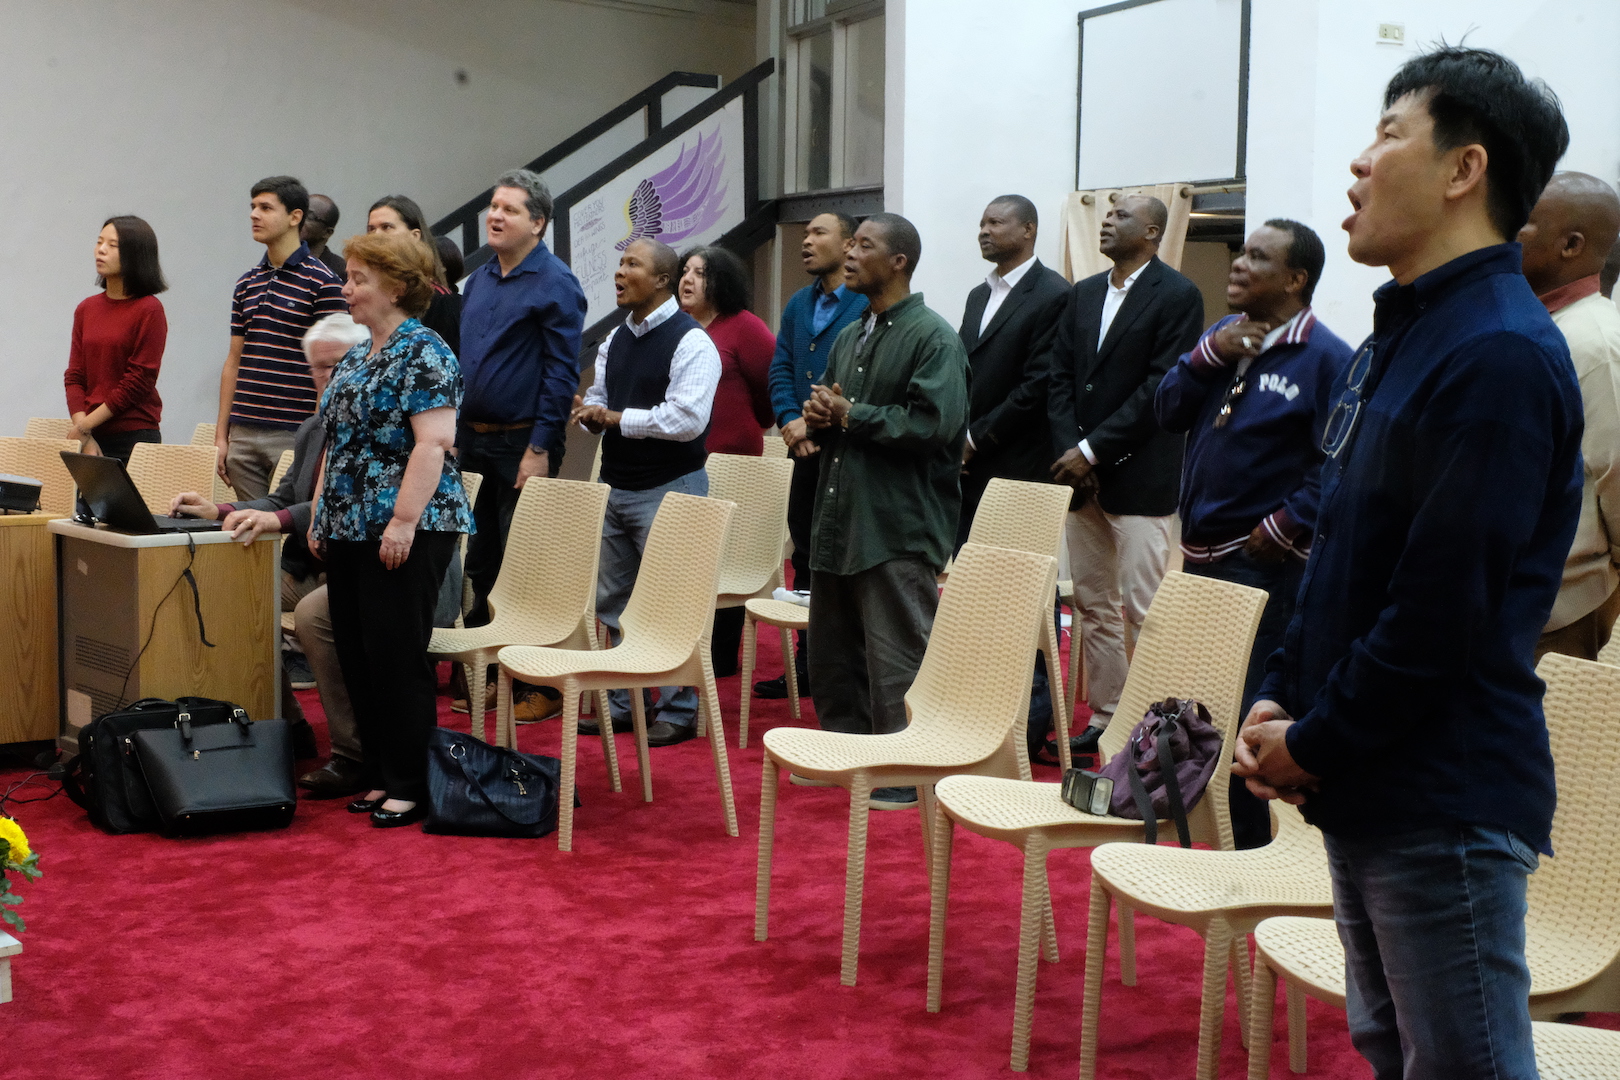 International Community Church is a diverse community of worshipers from around the world, particularly foreign migrant workers from Africa and the Philippines.